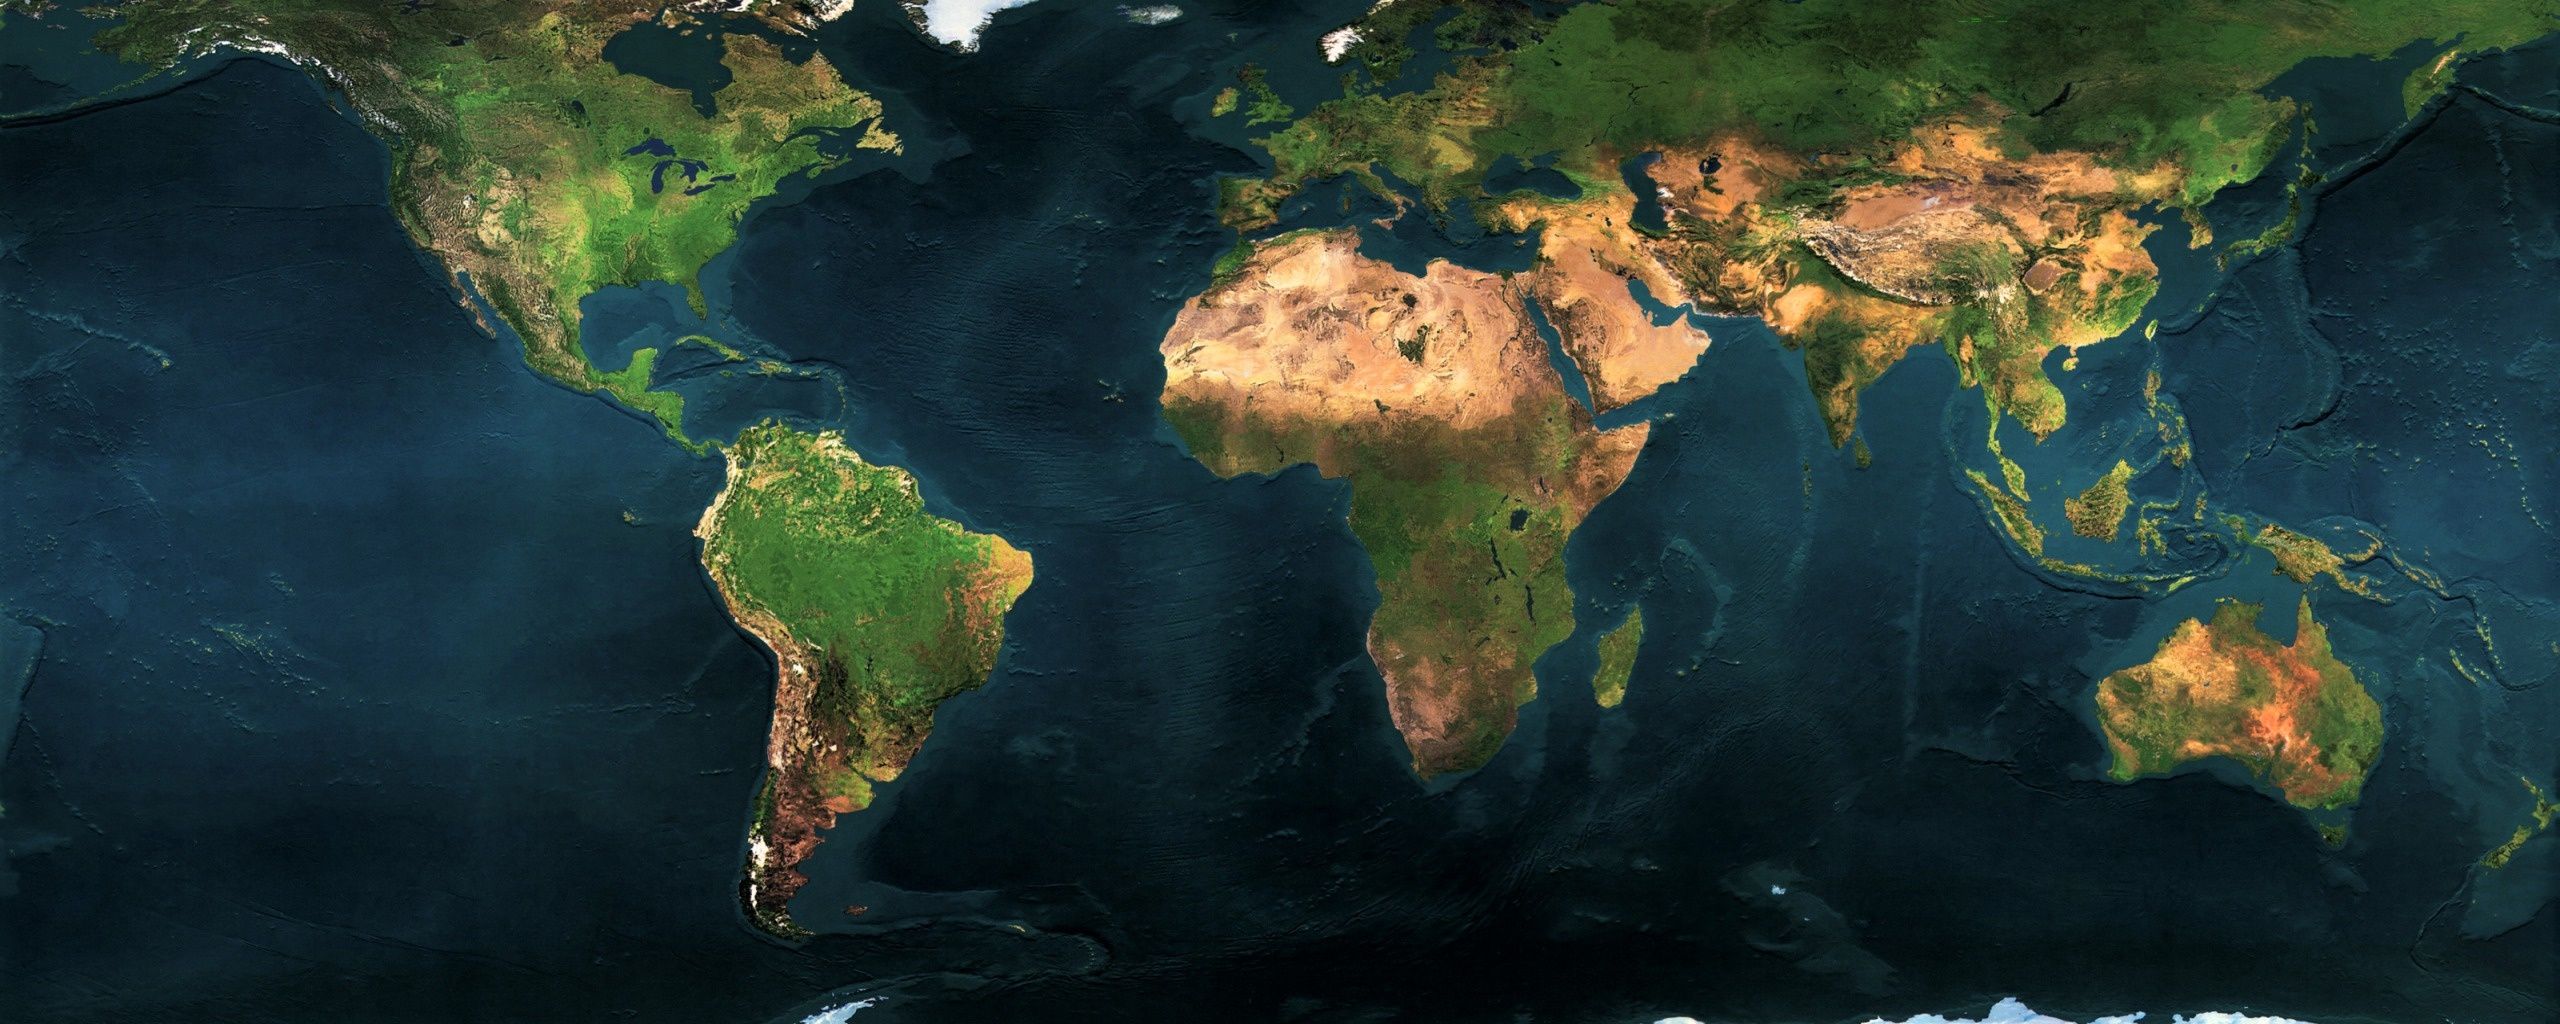 Earth Map Dual Monitor Wallpapers | HD Wallpapers